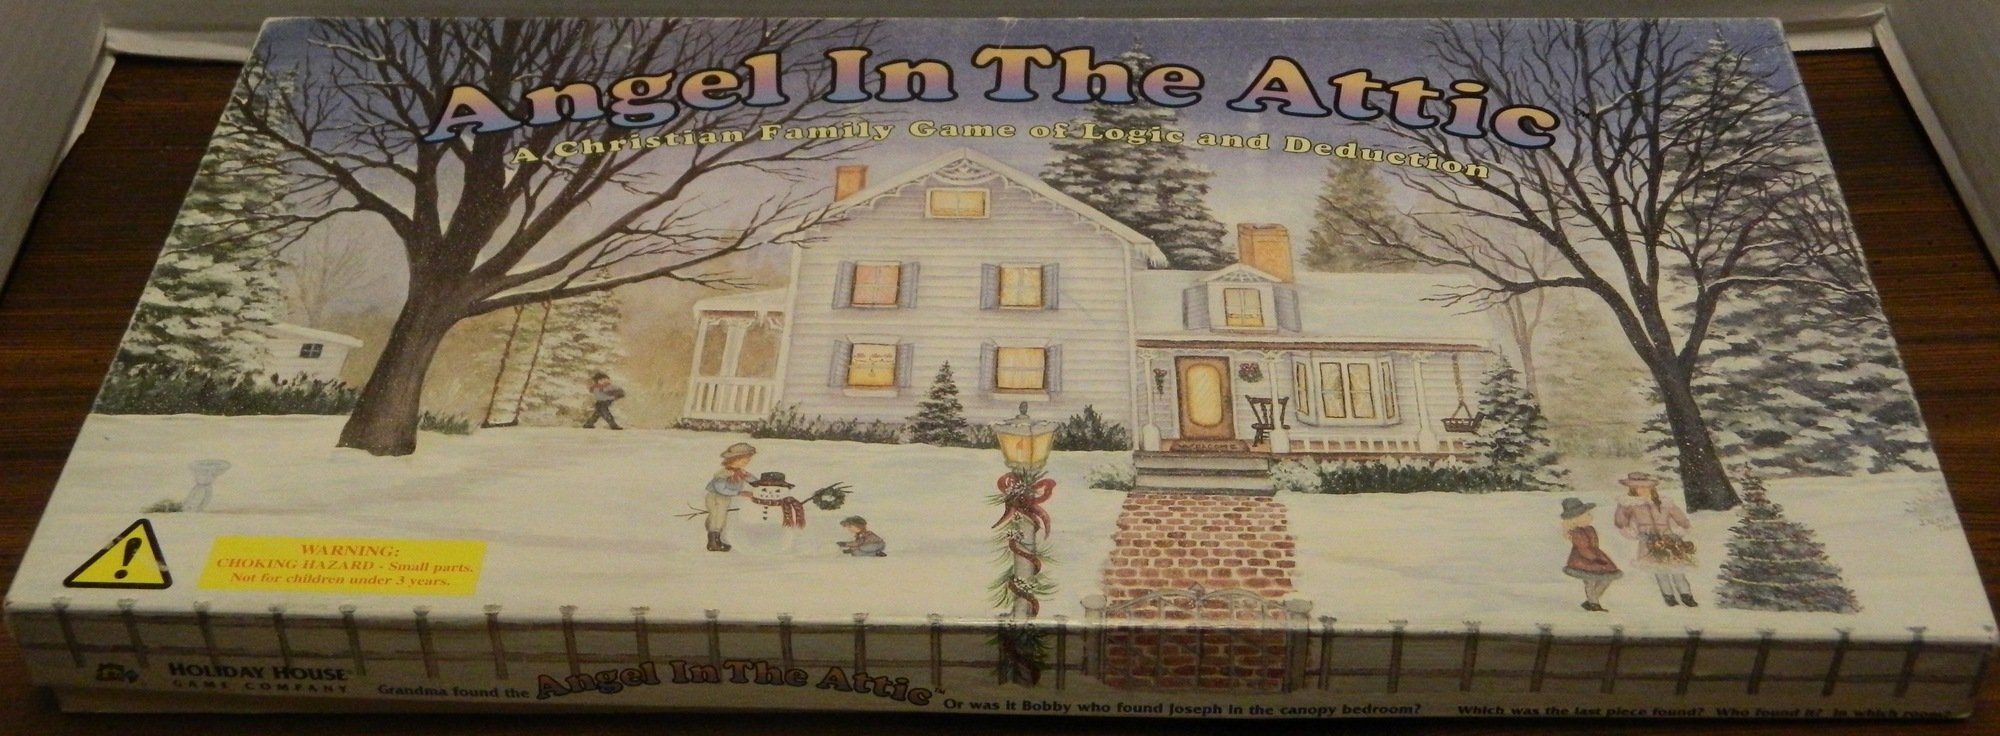 Angel in the Attic Board Game Review and Instructions